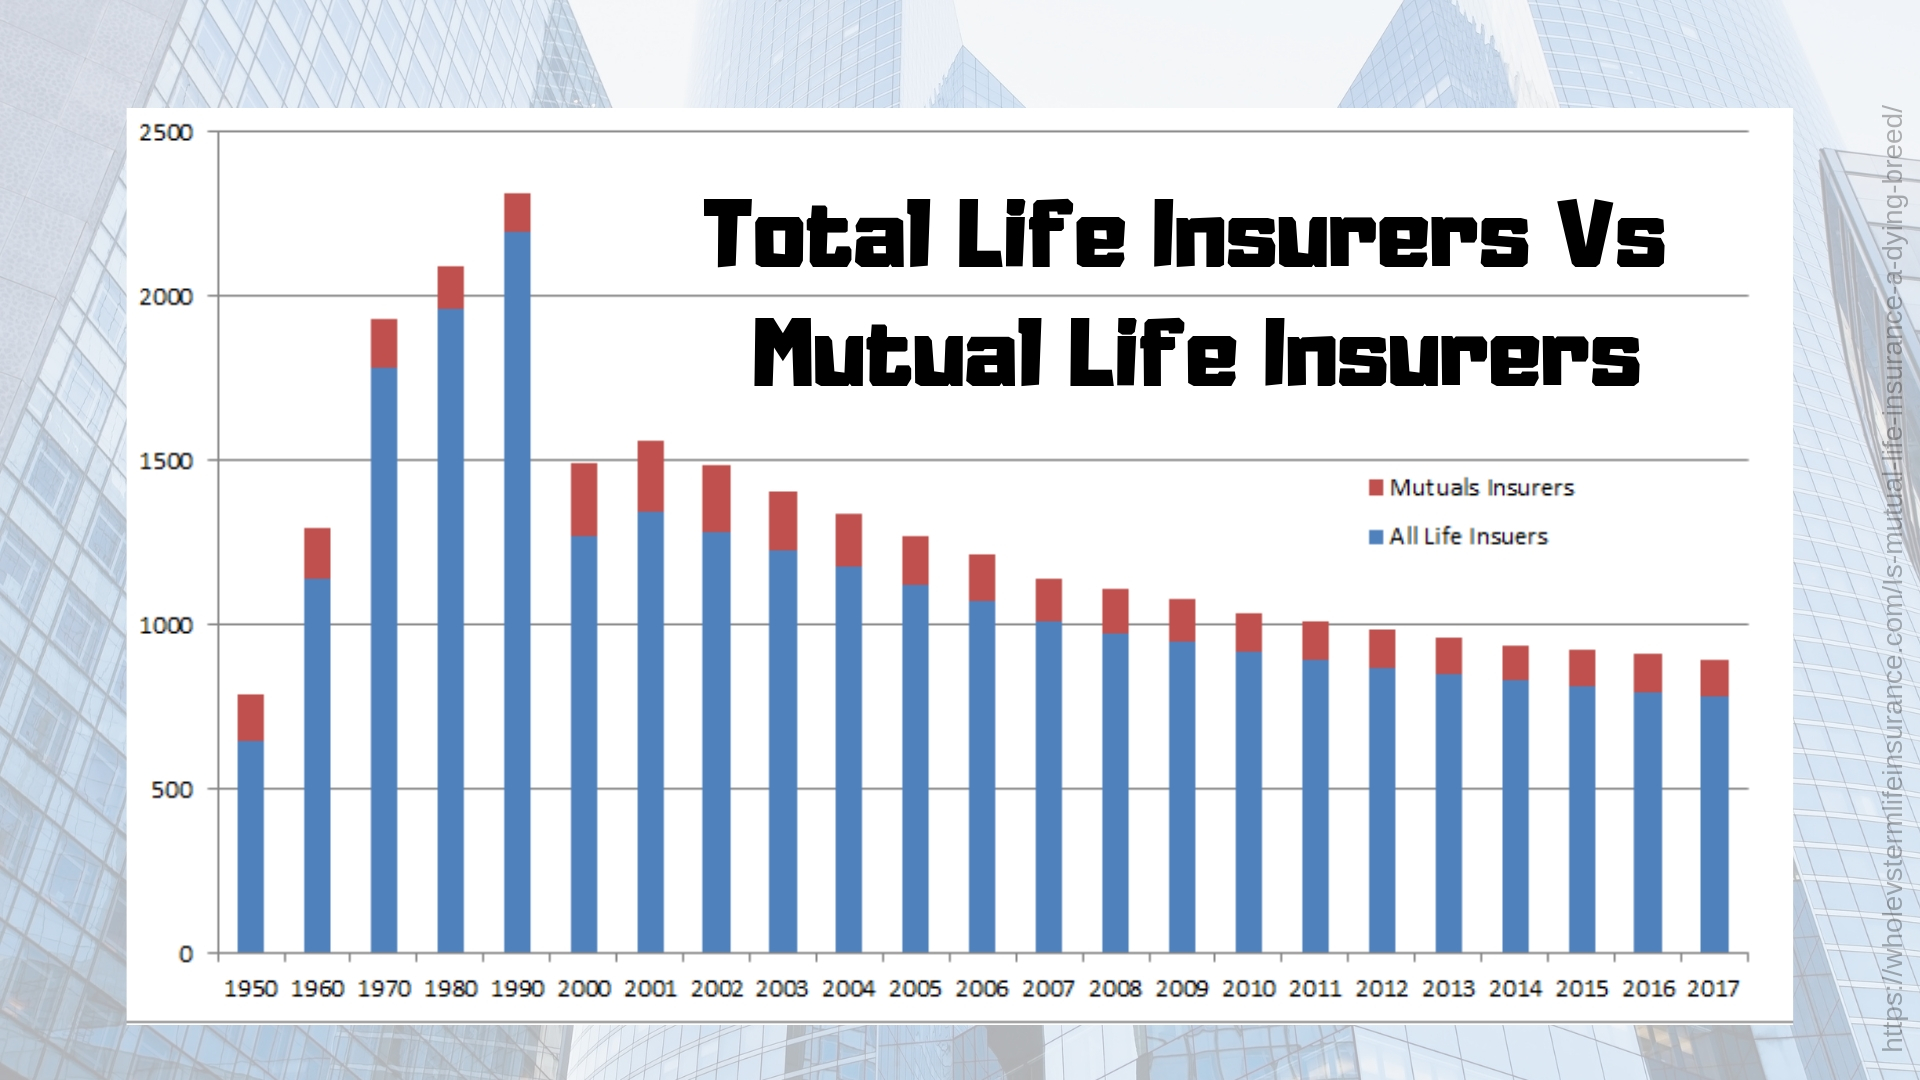 A Chart about Total Life Insurers in the US vs Mutual Life Insurers